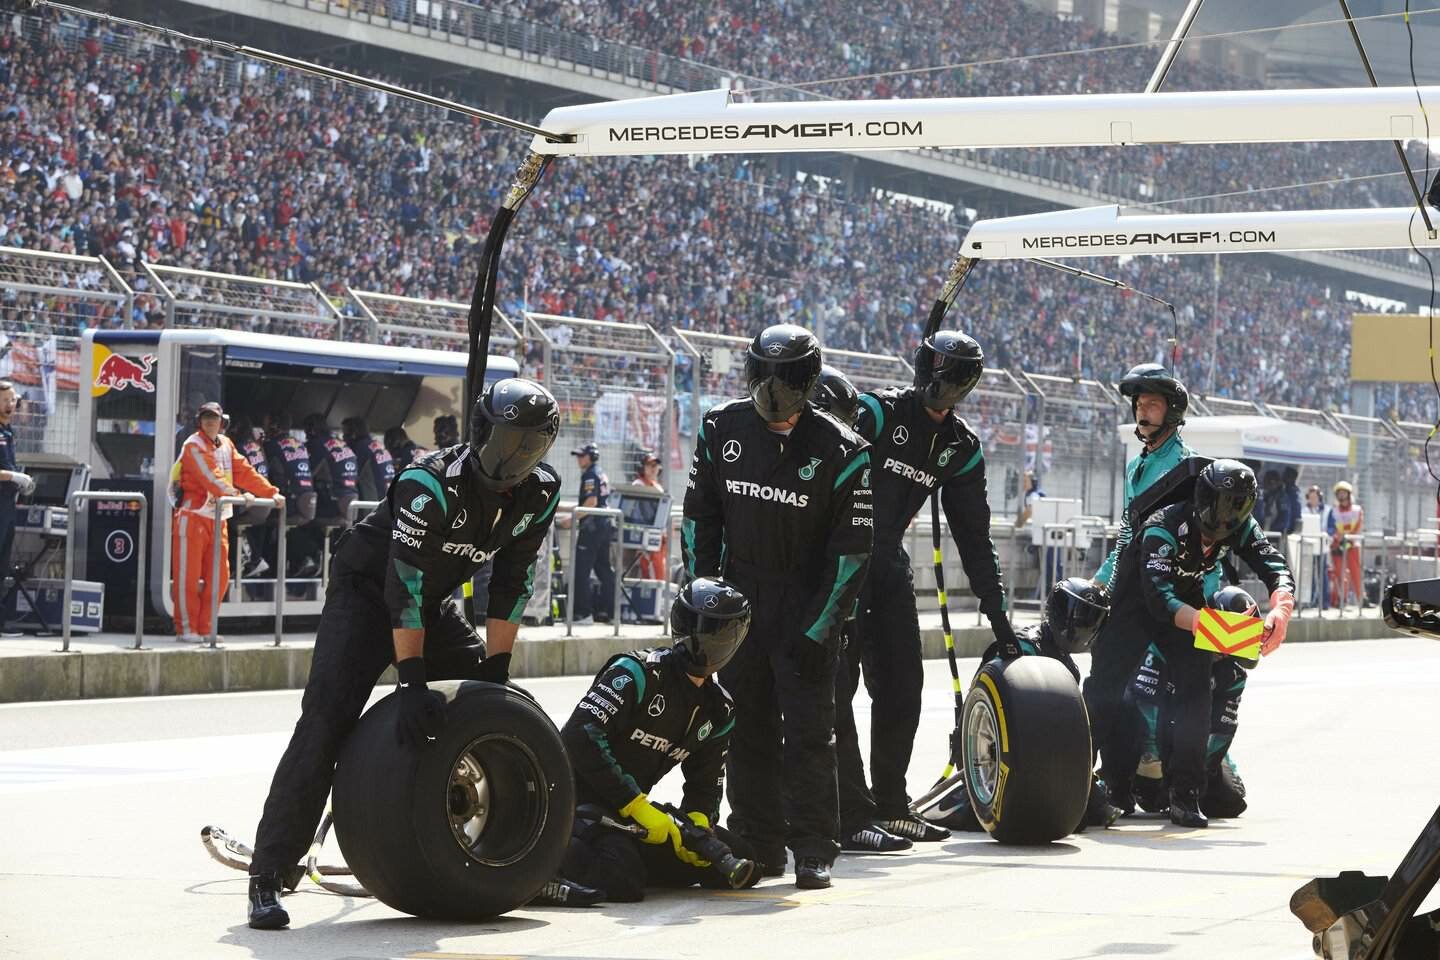 images_Formule1_2015_nieuws-april_strategy_report_gp_china_nieuwe_realiteit_mercedes_f1